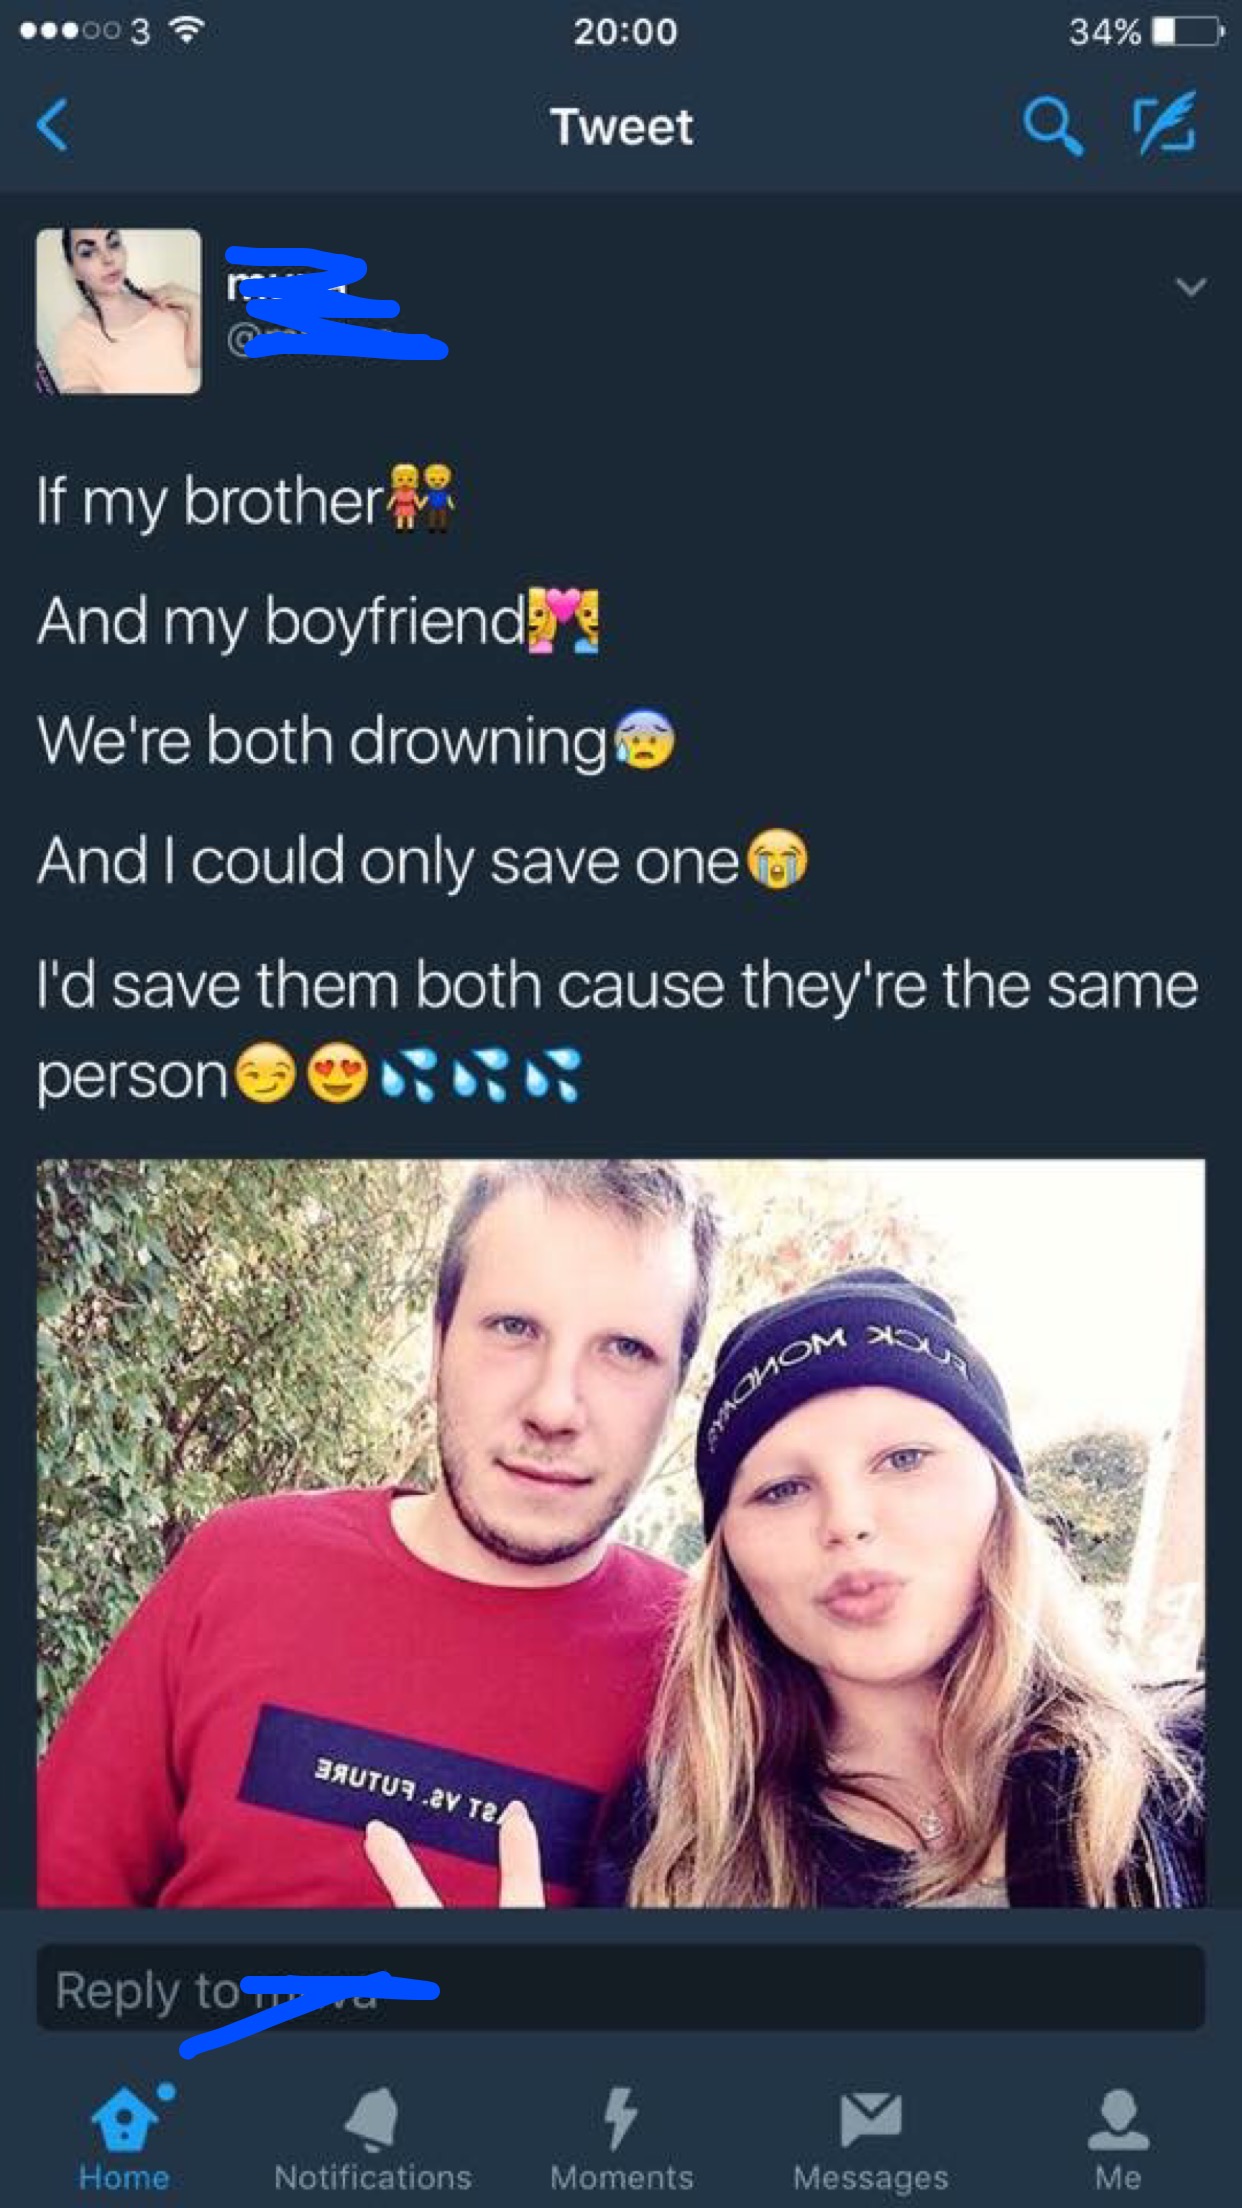 alabama 100 meme - ...003 34%D Tweet If my brother And my boyfriend og We're both drowning And I could only save one I'd save them both cause they're the same person Waom Bautus Sv Tai to a Home Notifications Moments Messages Me